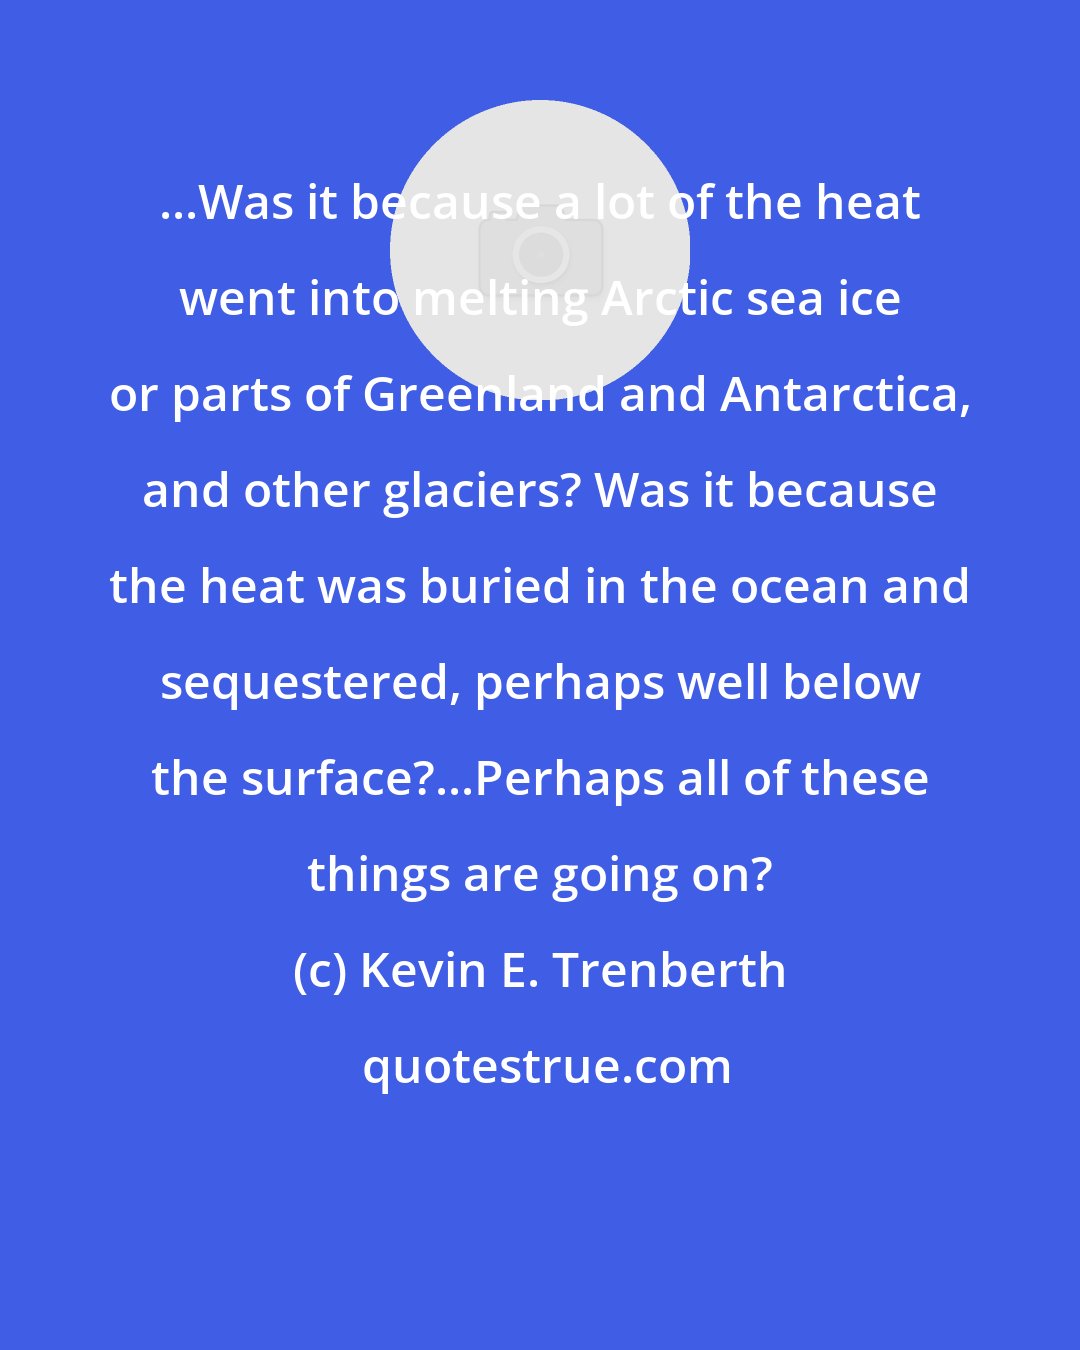 Kevin E. Trenberth: ...Was it because a lot of the heat went into melting Arctic sea ice or parts of Greenland and Antarctica, and other glaciers? Was it because the heat was buried in the ocean and sequestered, perhaps well below the surface?...Perhaps all of these things are going on?